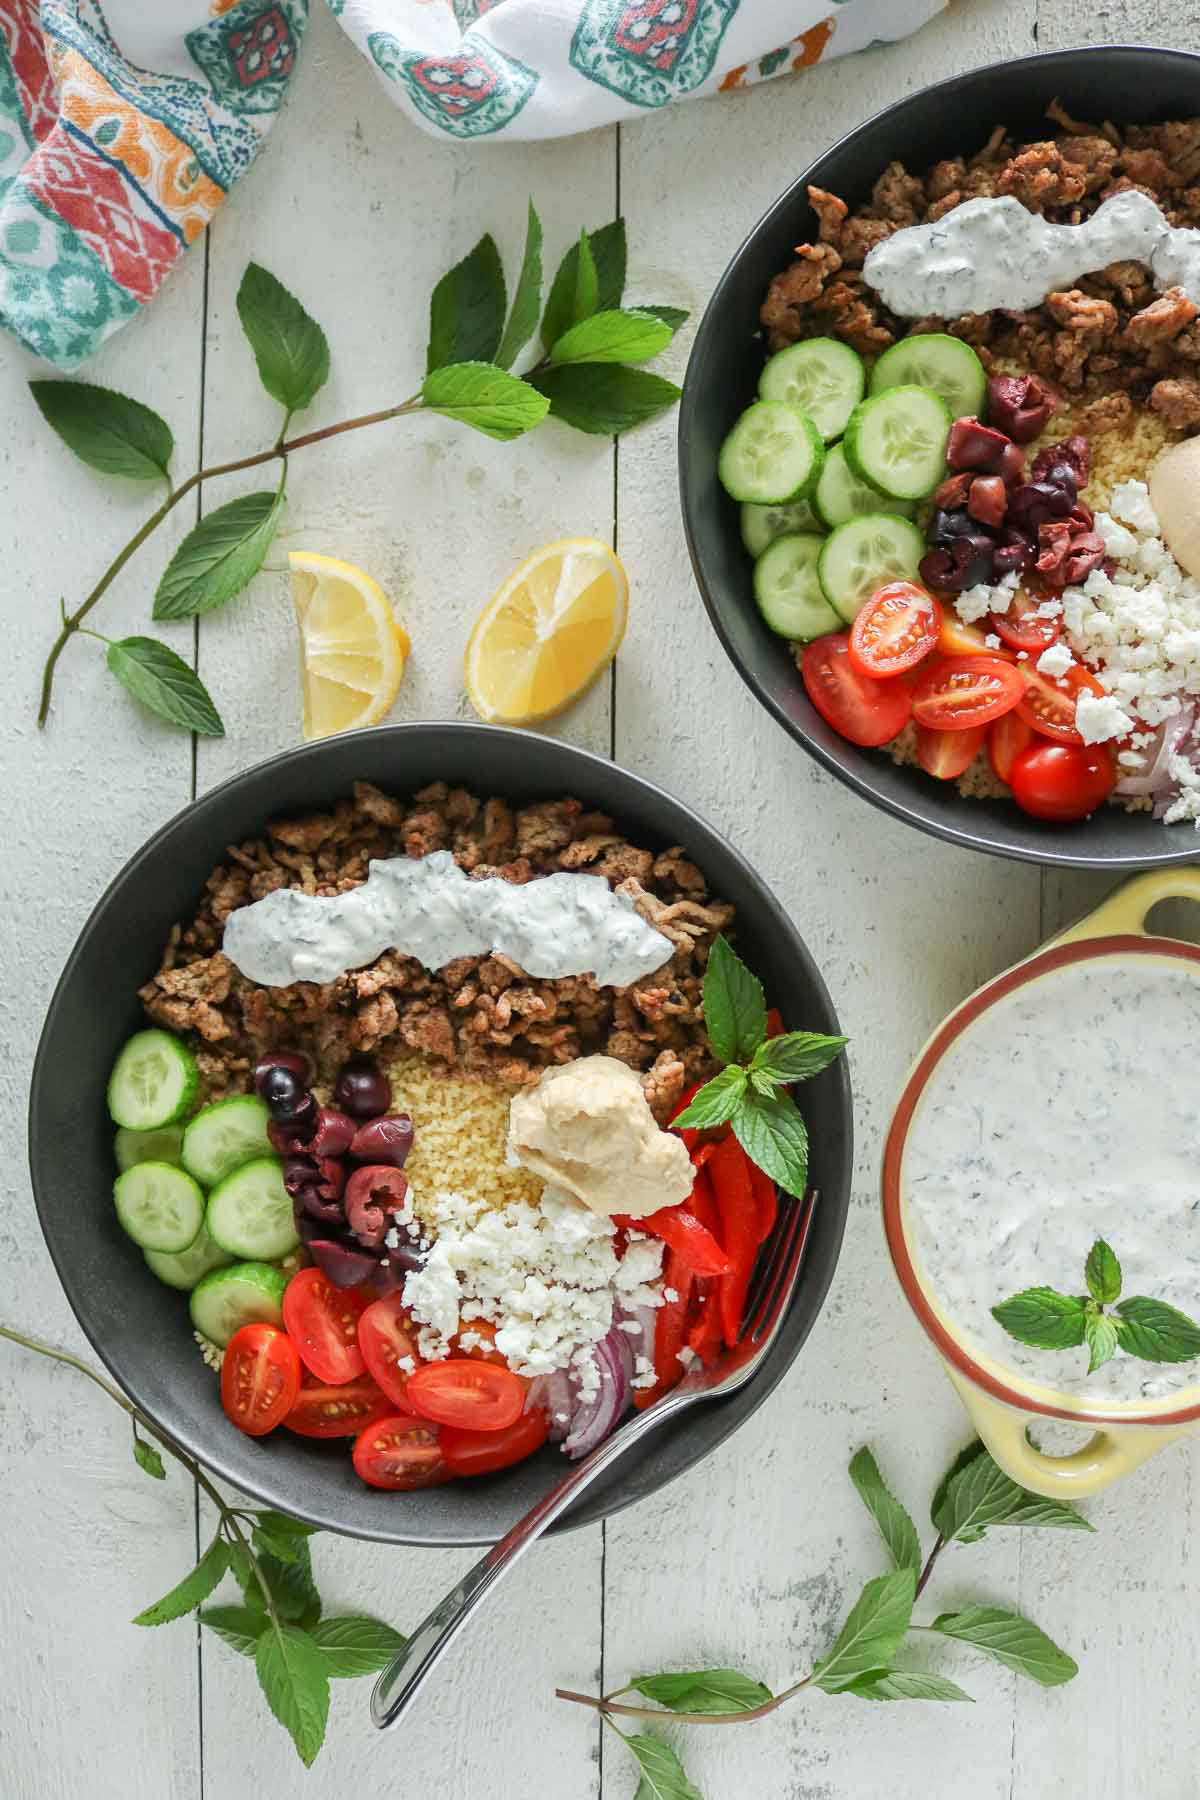 Two ground chicken and couscous bowls with toppings.